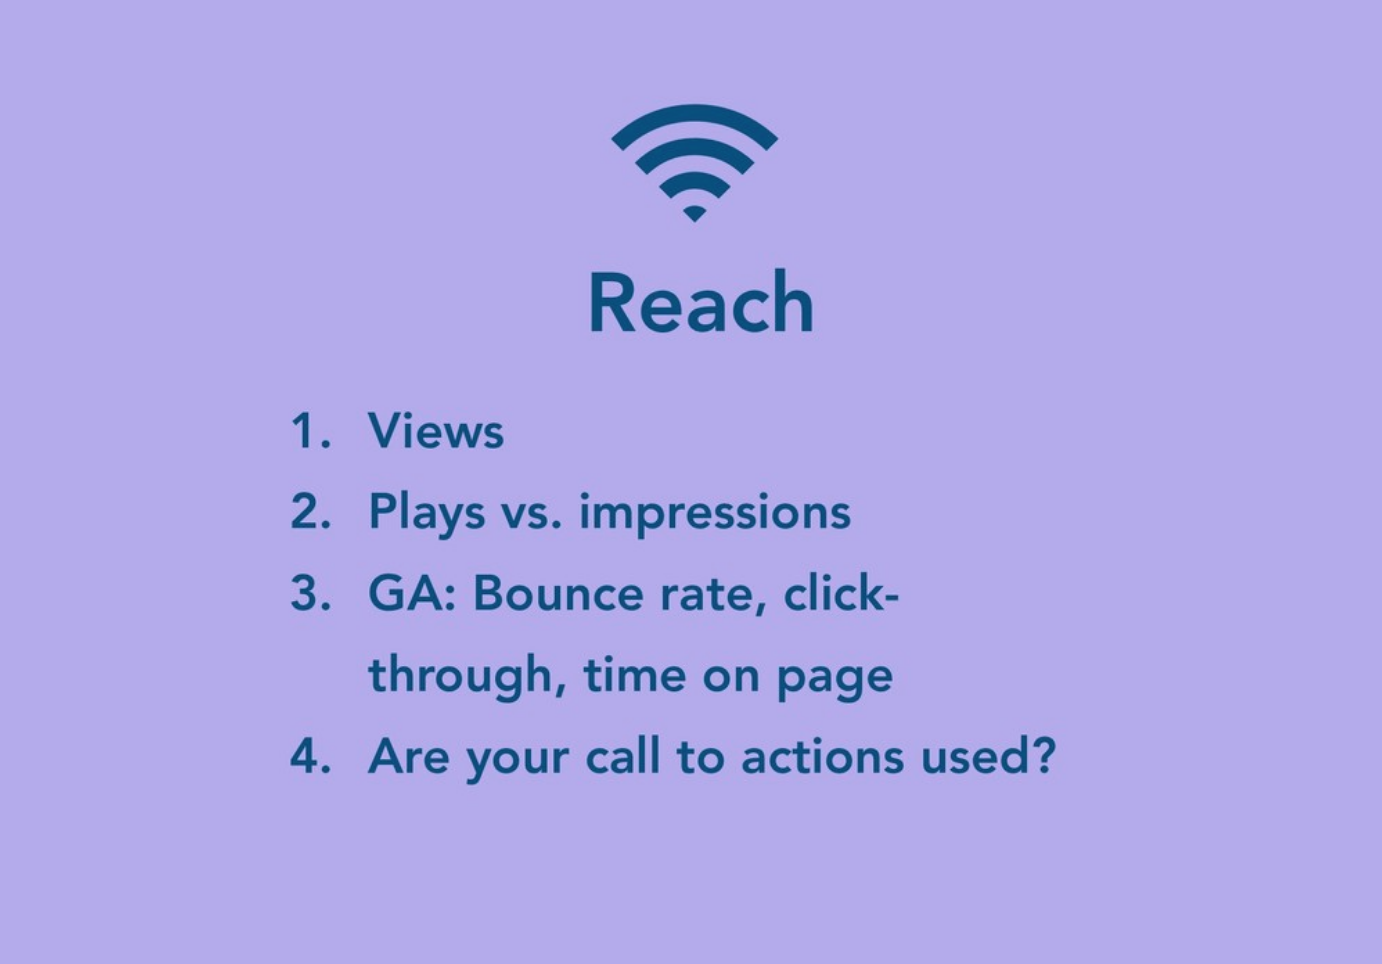 The reach of your video includes videos, plays vs impression, Google Analytics metrics, and whether users have clicked on your call-to-action